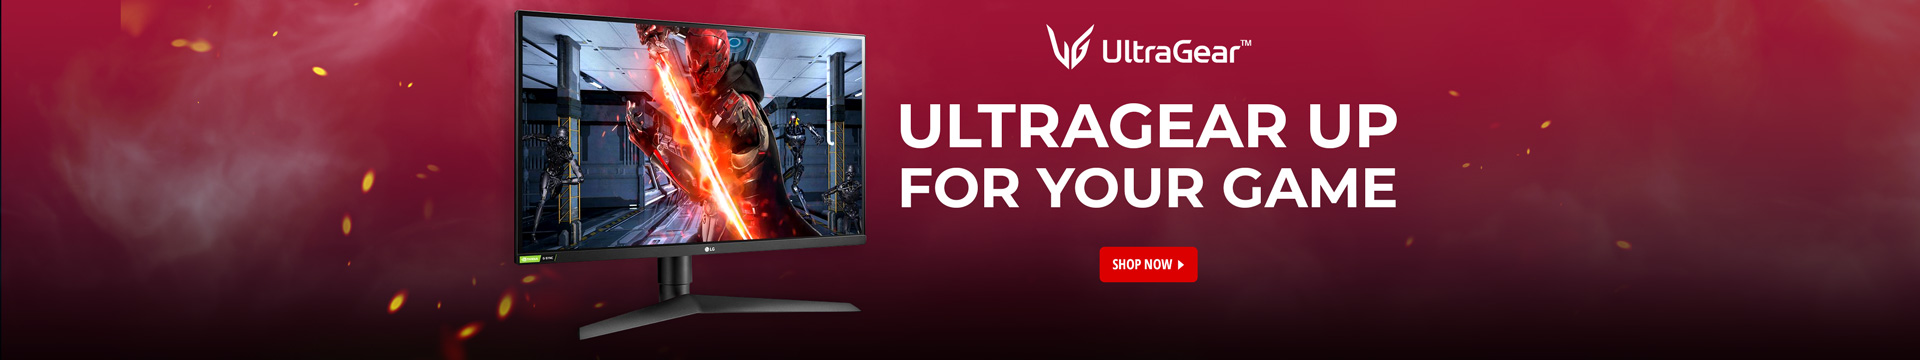 ULTRAGEAR UP FOR YOUR GAME